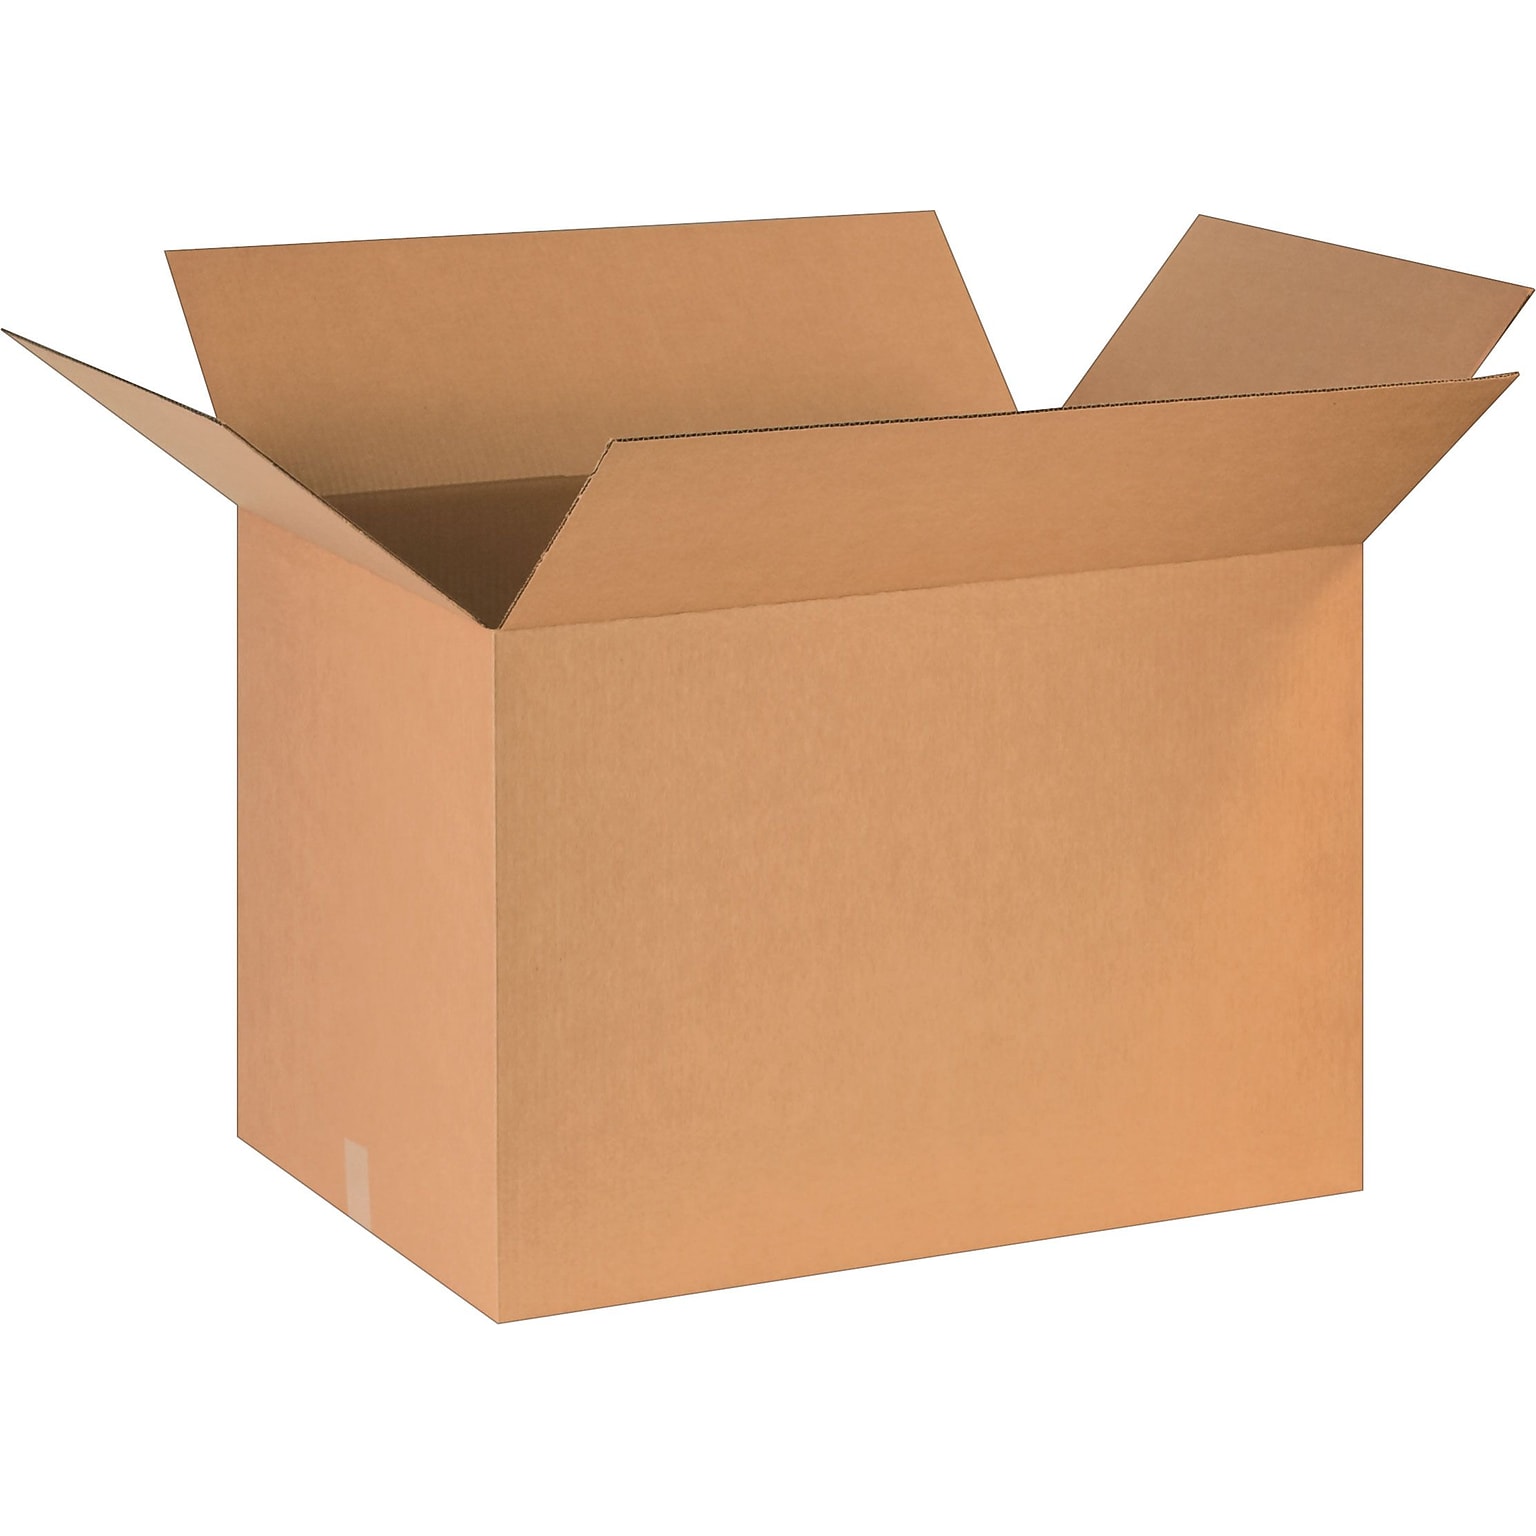 30  x  20  x  20  Shipping  Boxes,  32  ECT,  Brown,  10/Bundle  (BS302020)